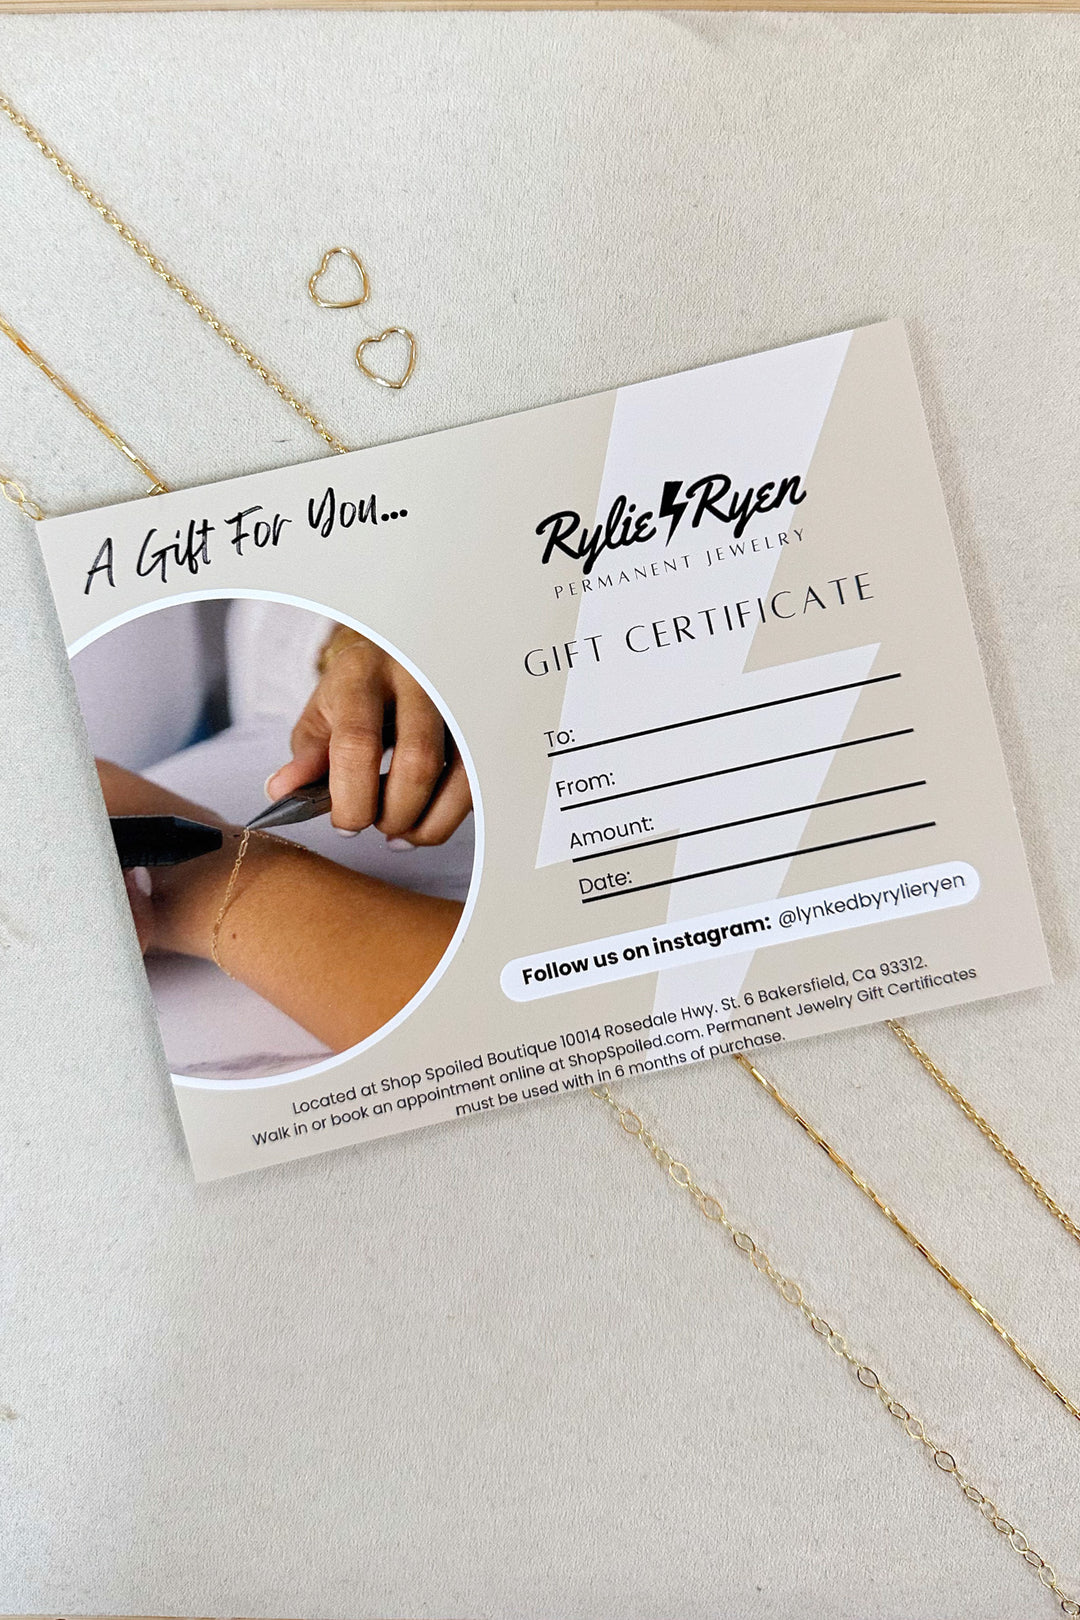 Rylie Ryen Permanent Jewelry Gift Card - ShopSpoiled